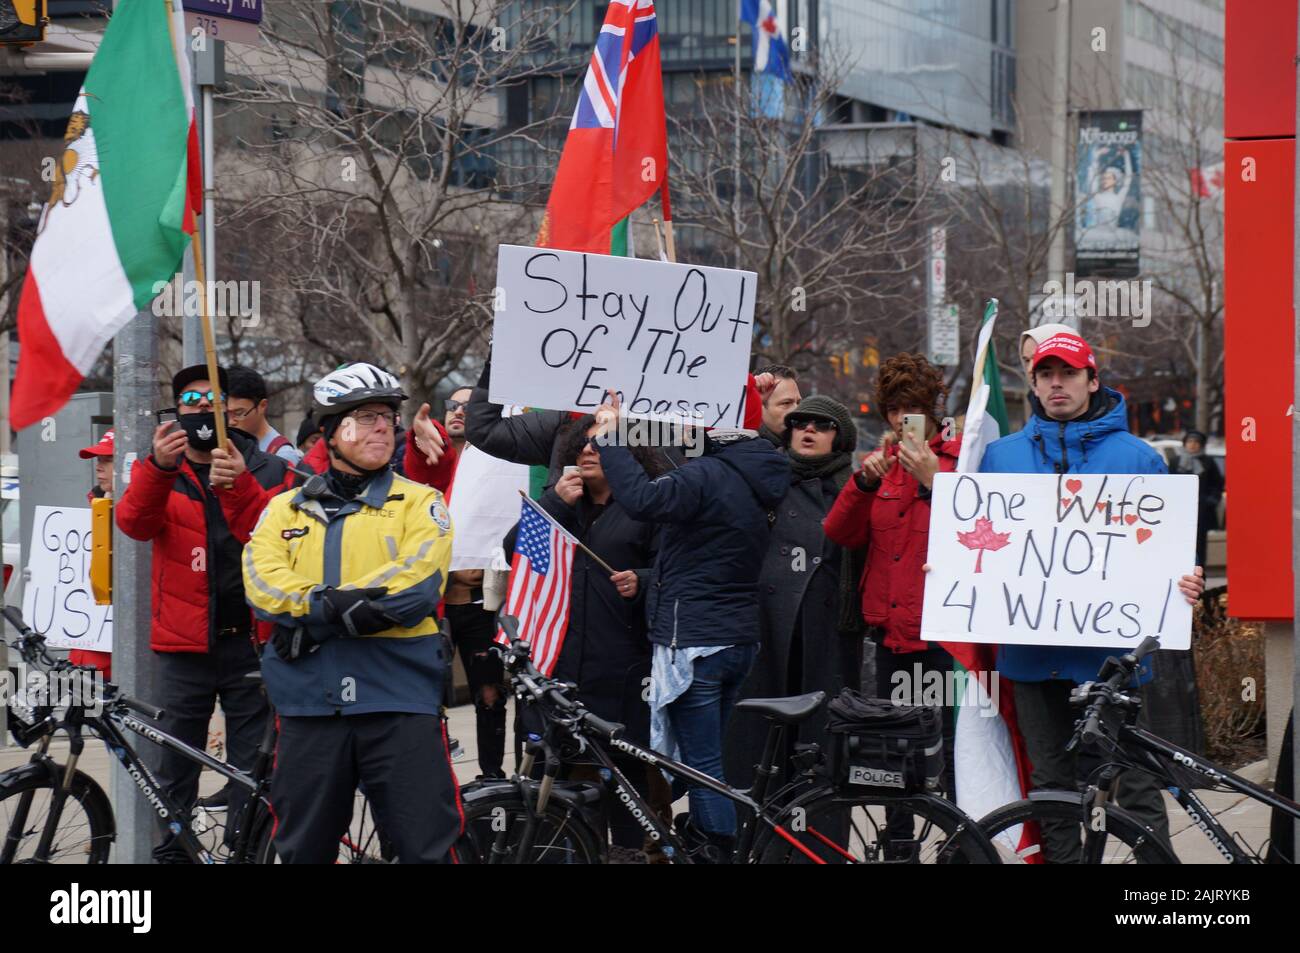 TORONTO, CANADA - 01 04 2020: Police officer guarding the rally outside U.S. Consulate in Toronto supporting US President Donald Trump's policy in Stock Photo